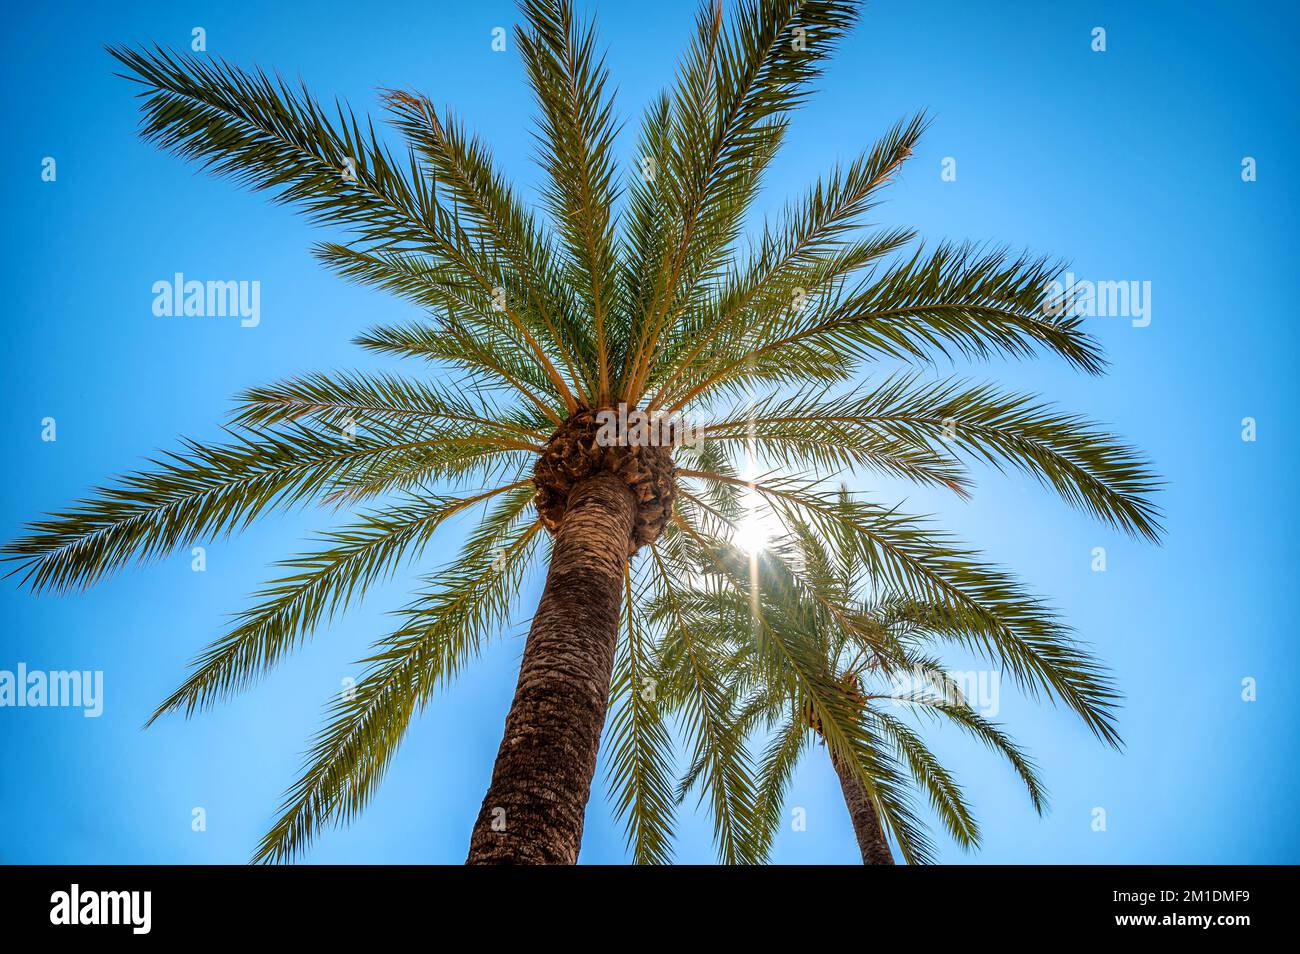 Real date palm tree in front of bright blue sky backlit by the sun Stock Photo